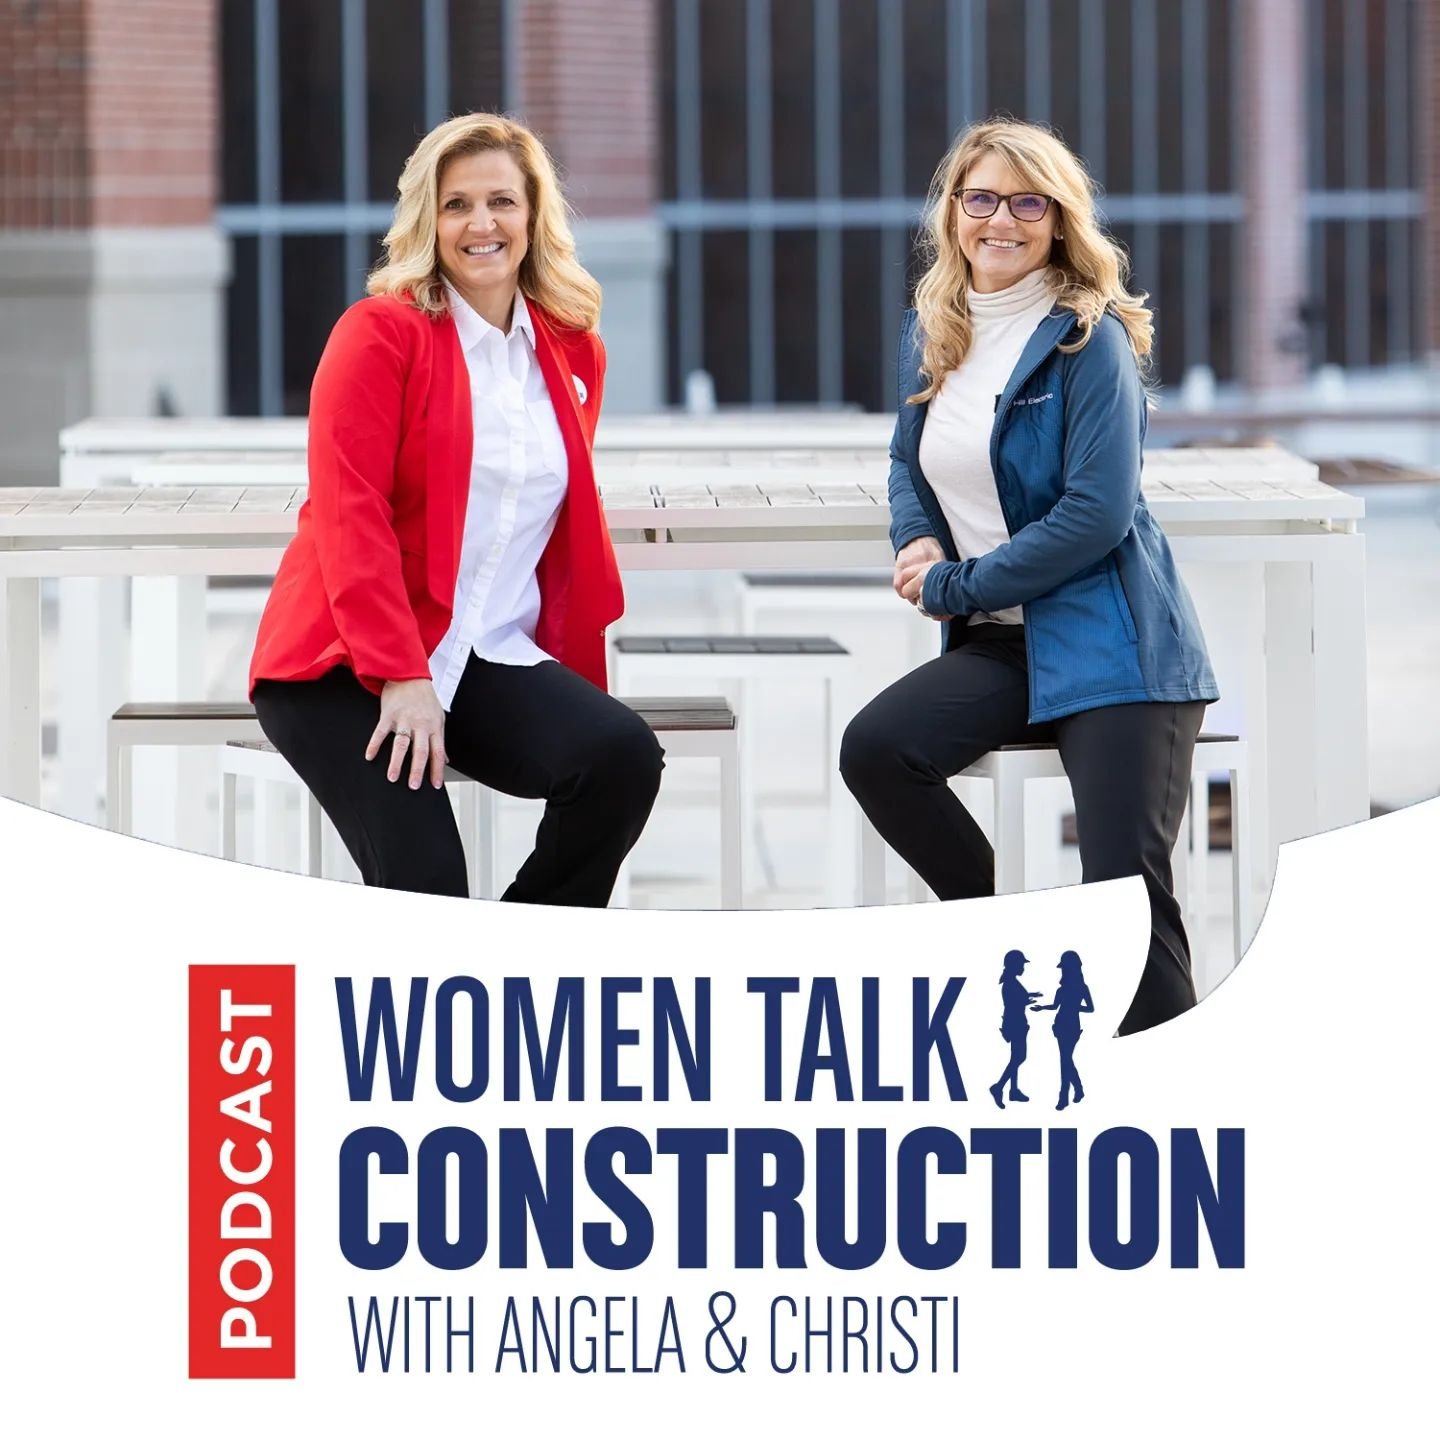 We&nbsp;❤️&nbsp;sharing STORIES from incredible people and organizations!
.
Episode 111: 'WCOE &amp; Government' 
.
Christi and Angela Gardner discuss the significant impact of the&nbsp;National WCOE Women Construction Owners and Executives USA&nbsp;